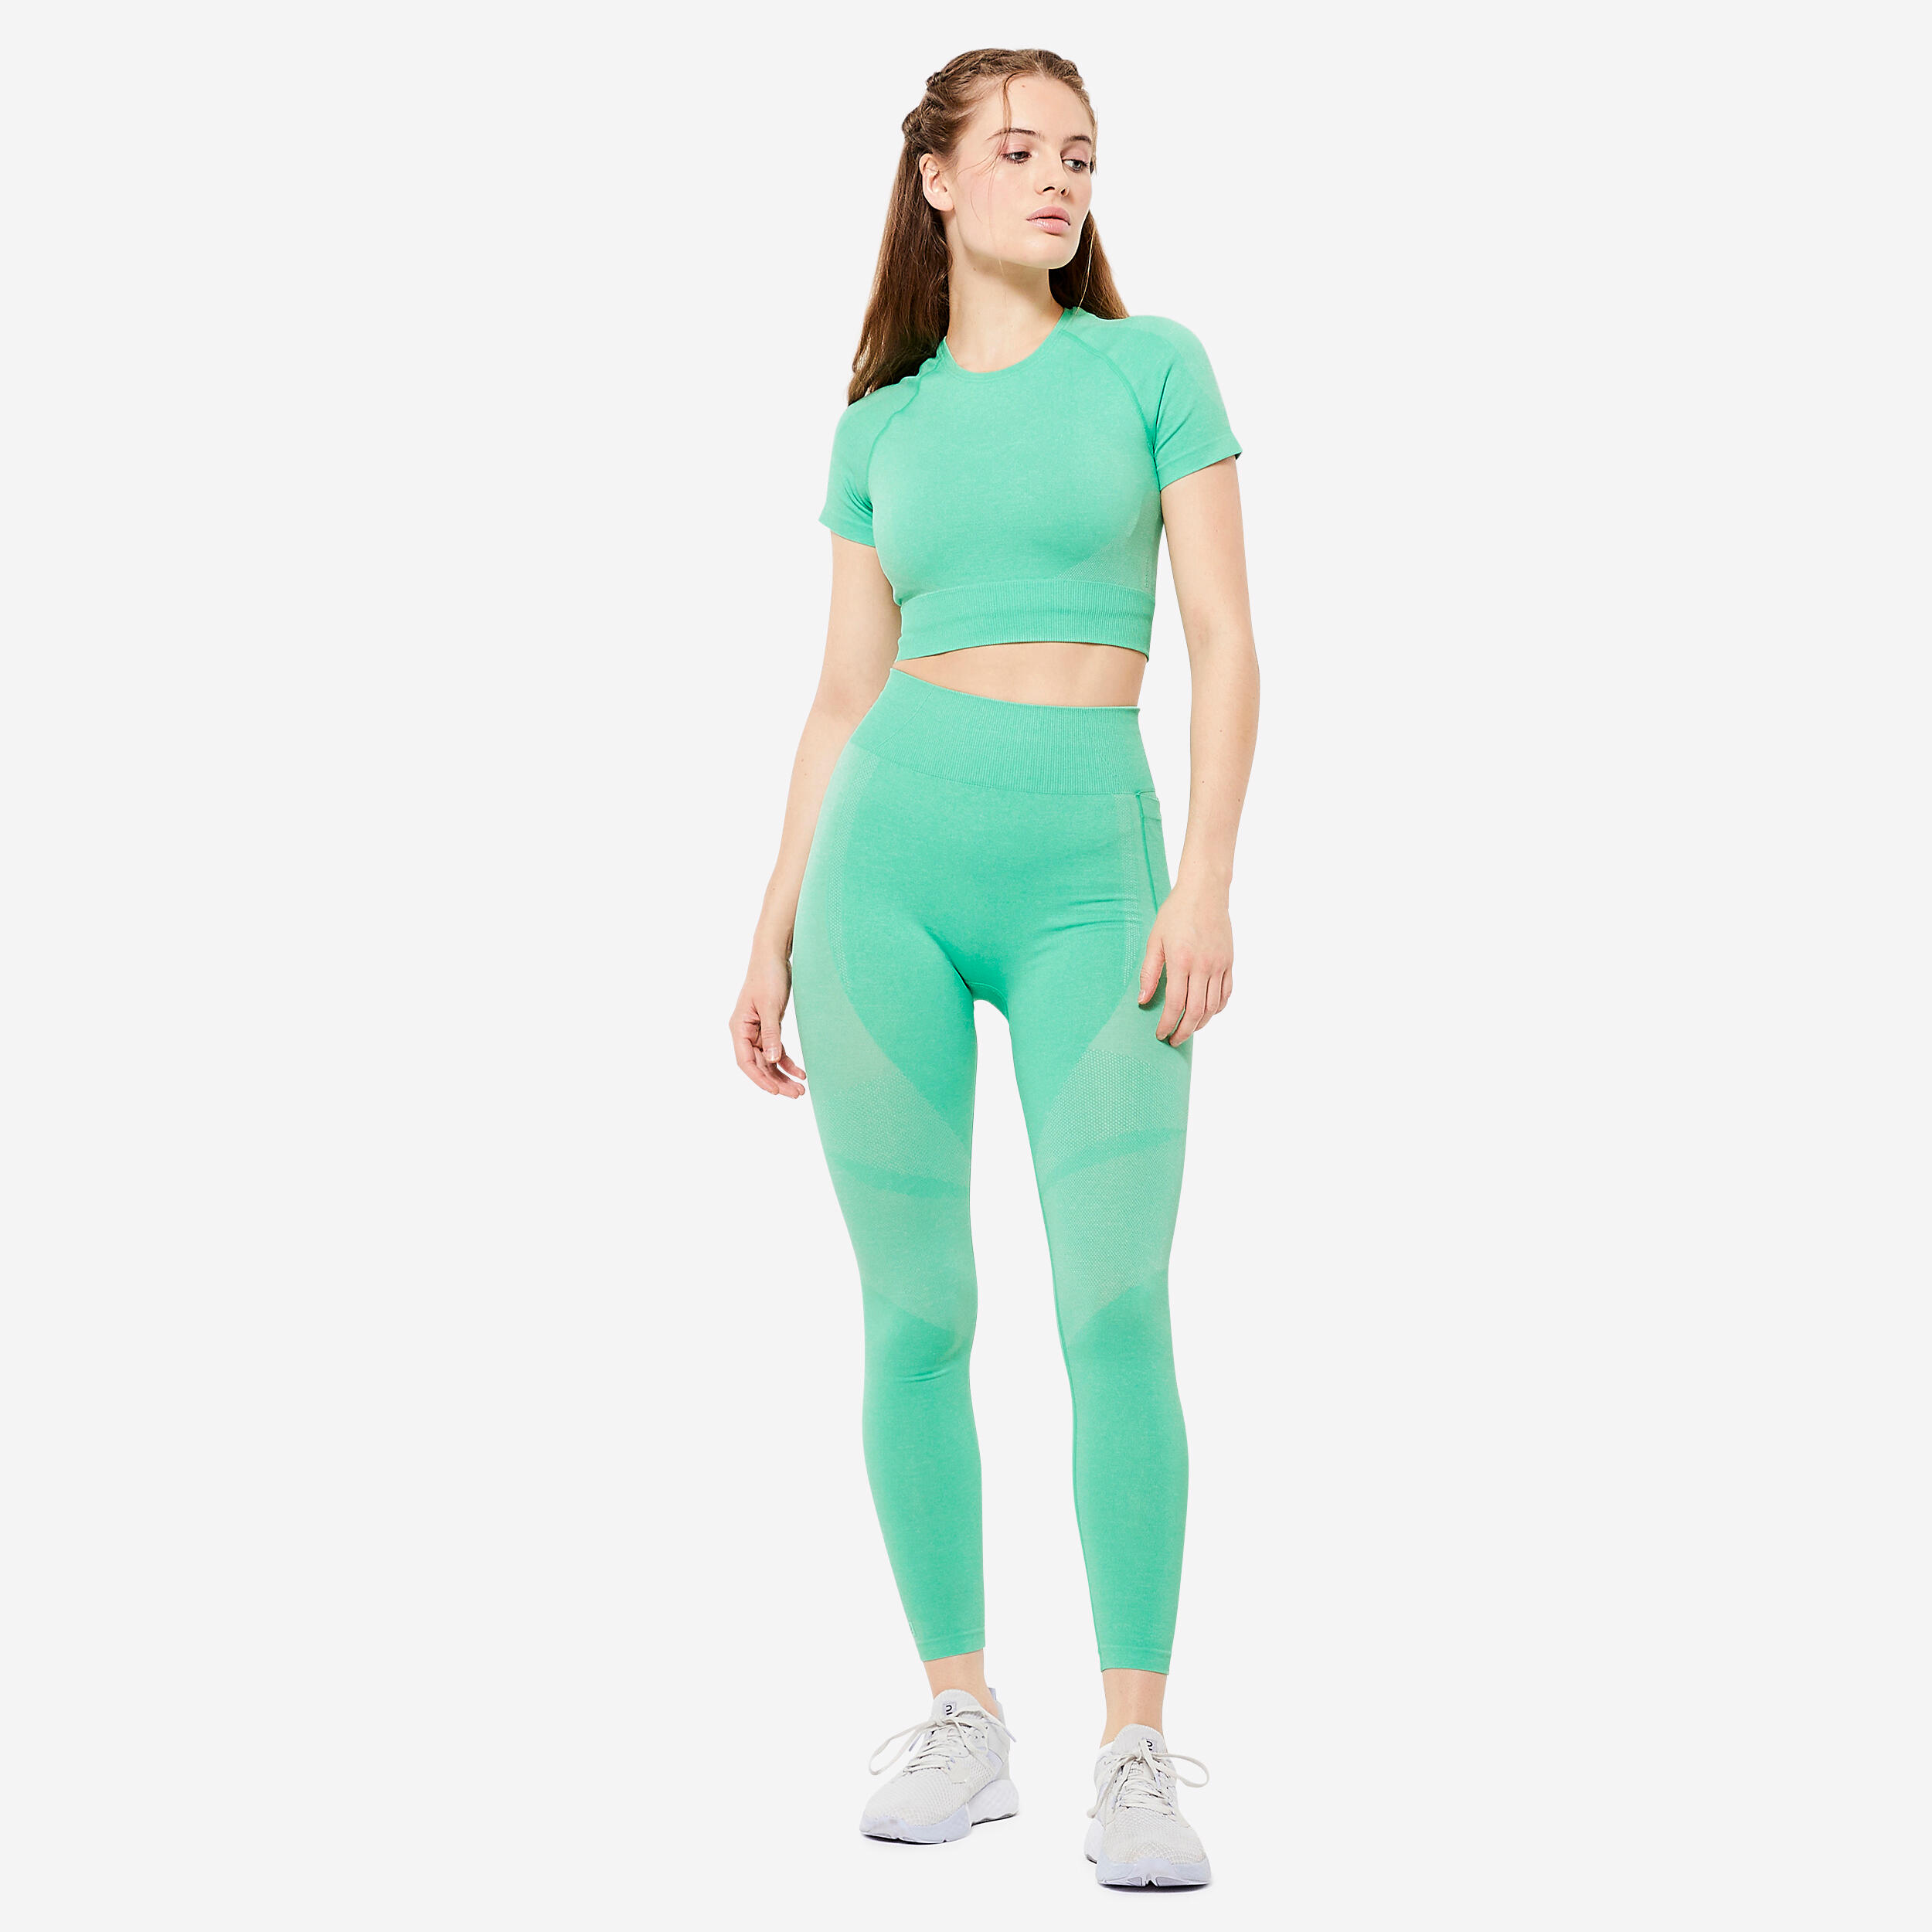 Hoxton Haus seamless gym legging shorts in bright green - part of a set